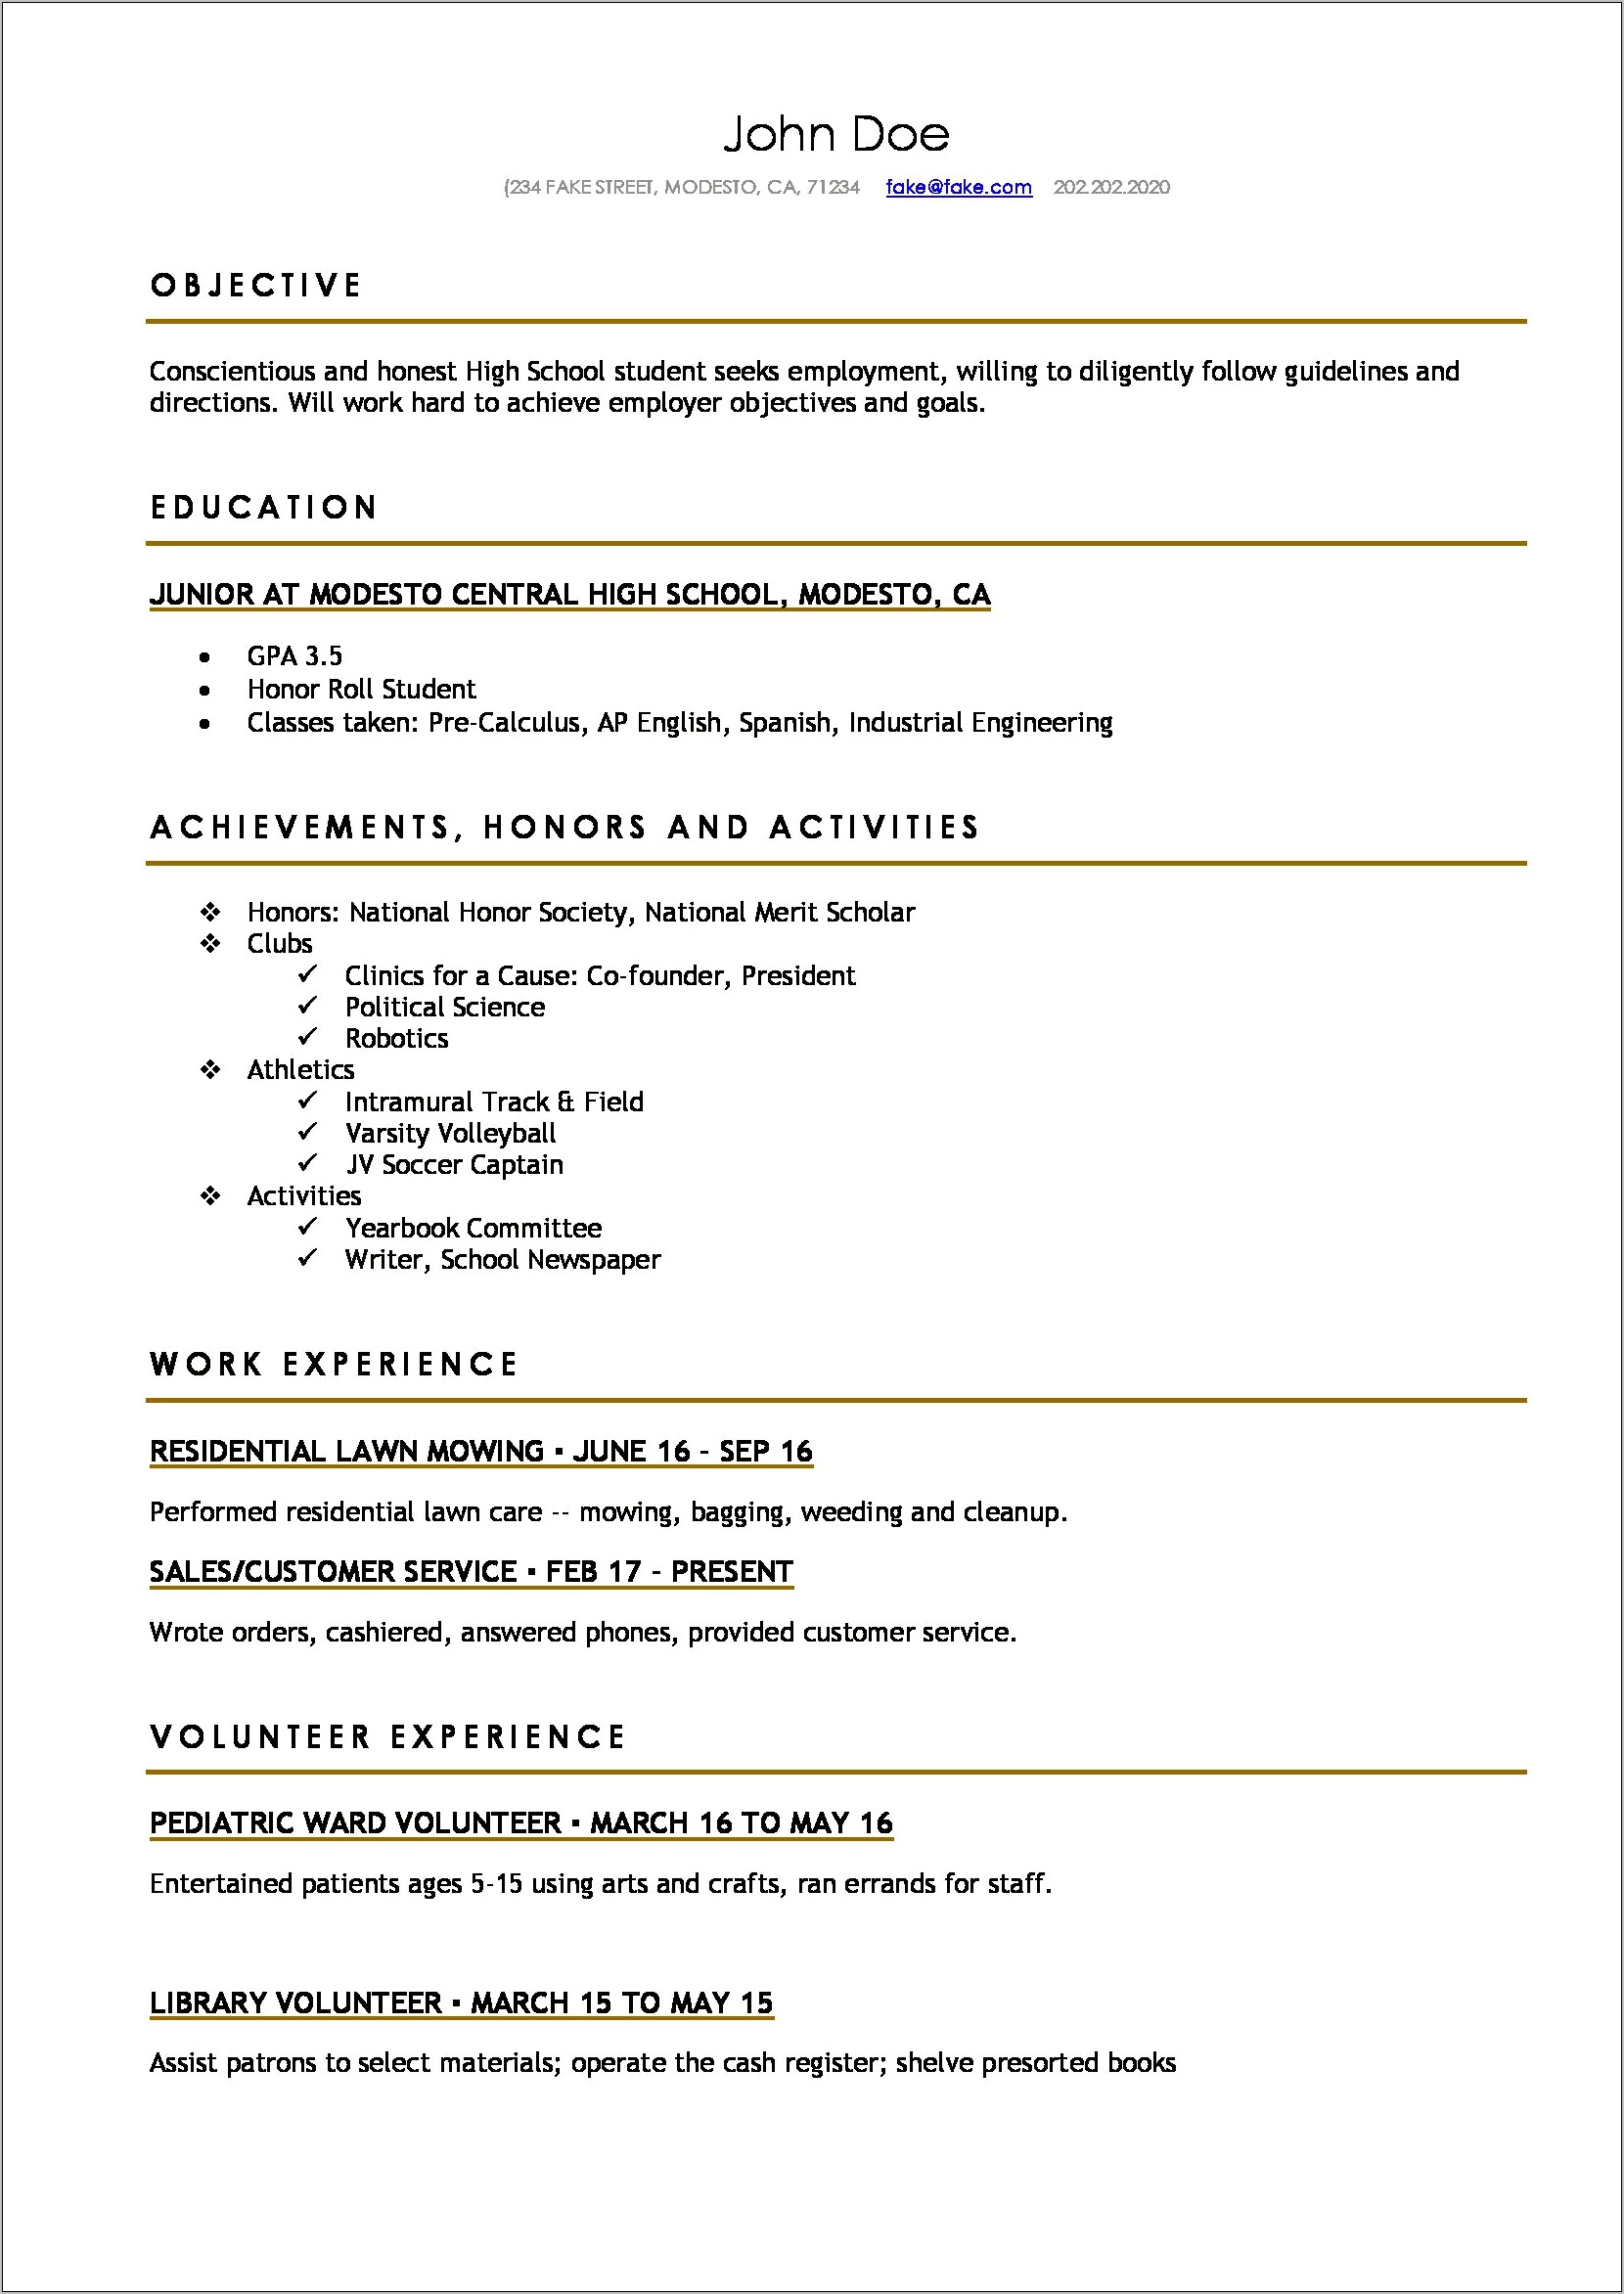 Resume For Partime Student High School Student Objectie